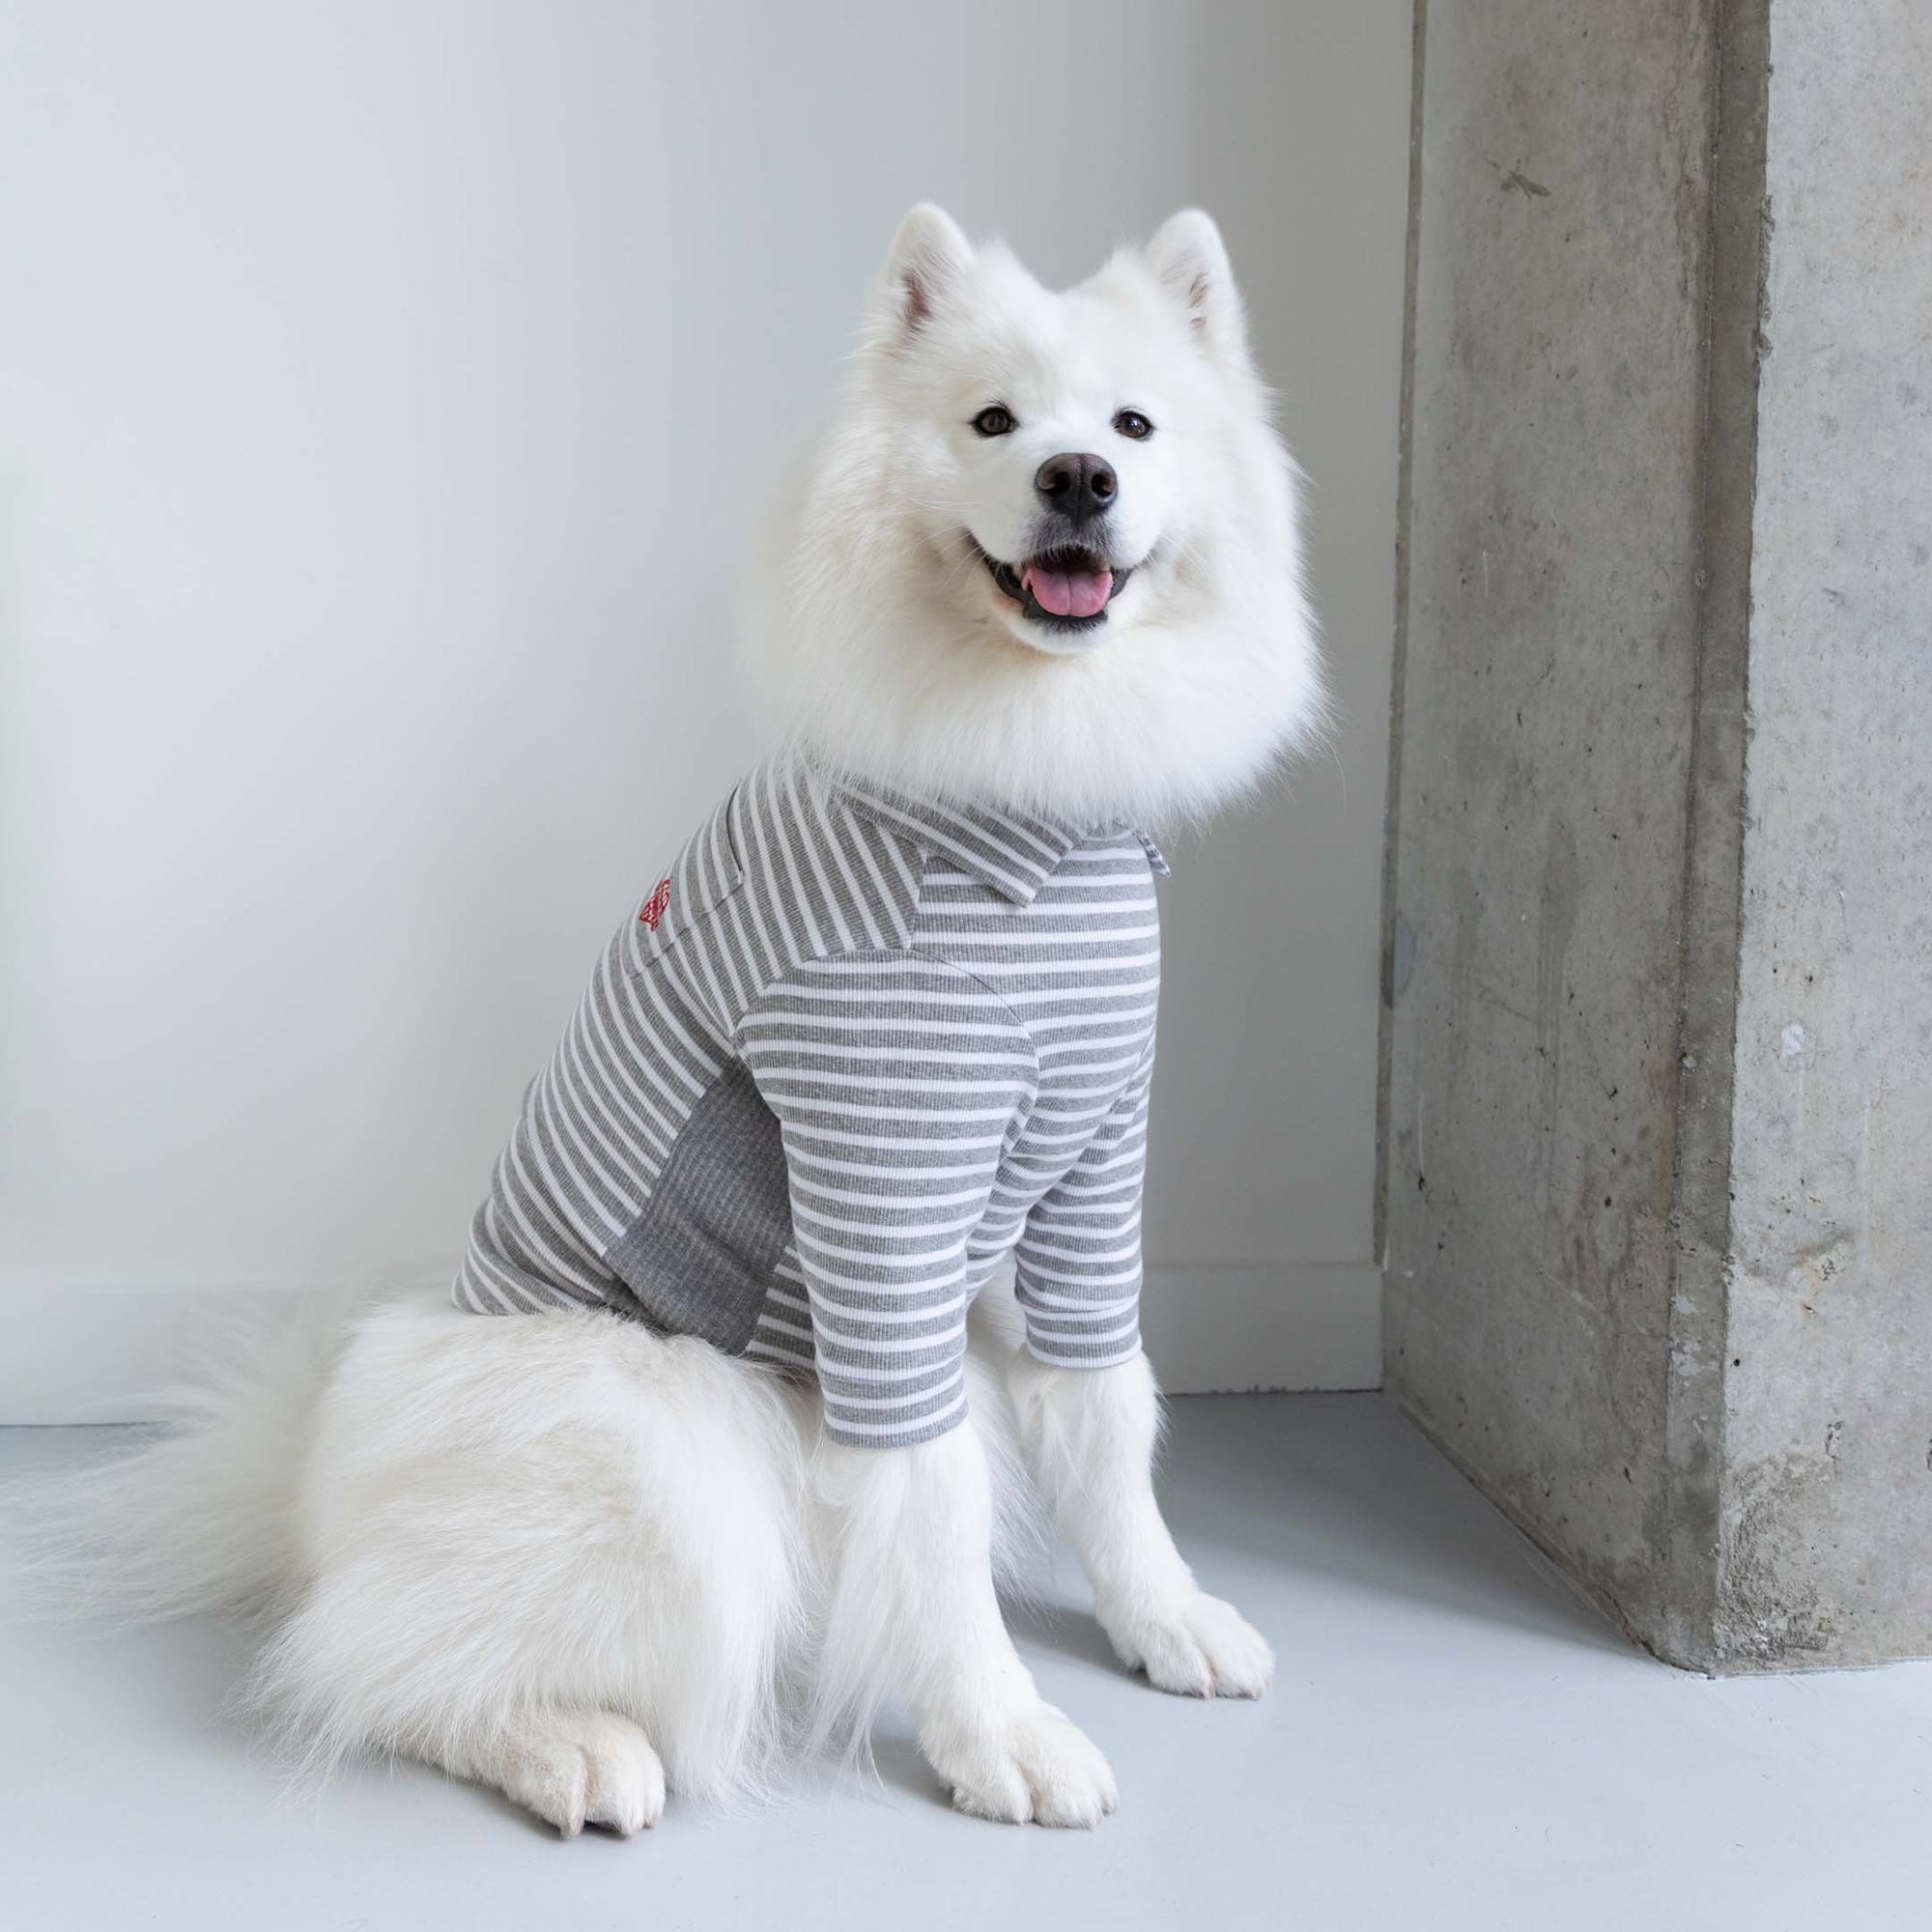 A fluffy white Samoyed dog sitting, wearing a grey and white striped turtleneck sweater with a small red emblem, looking happy with its tongue out, against a grey and white corner background.